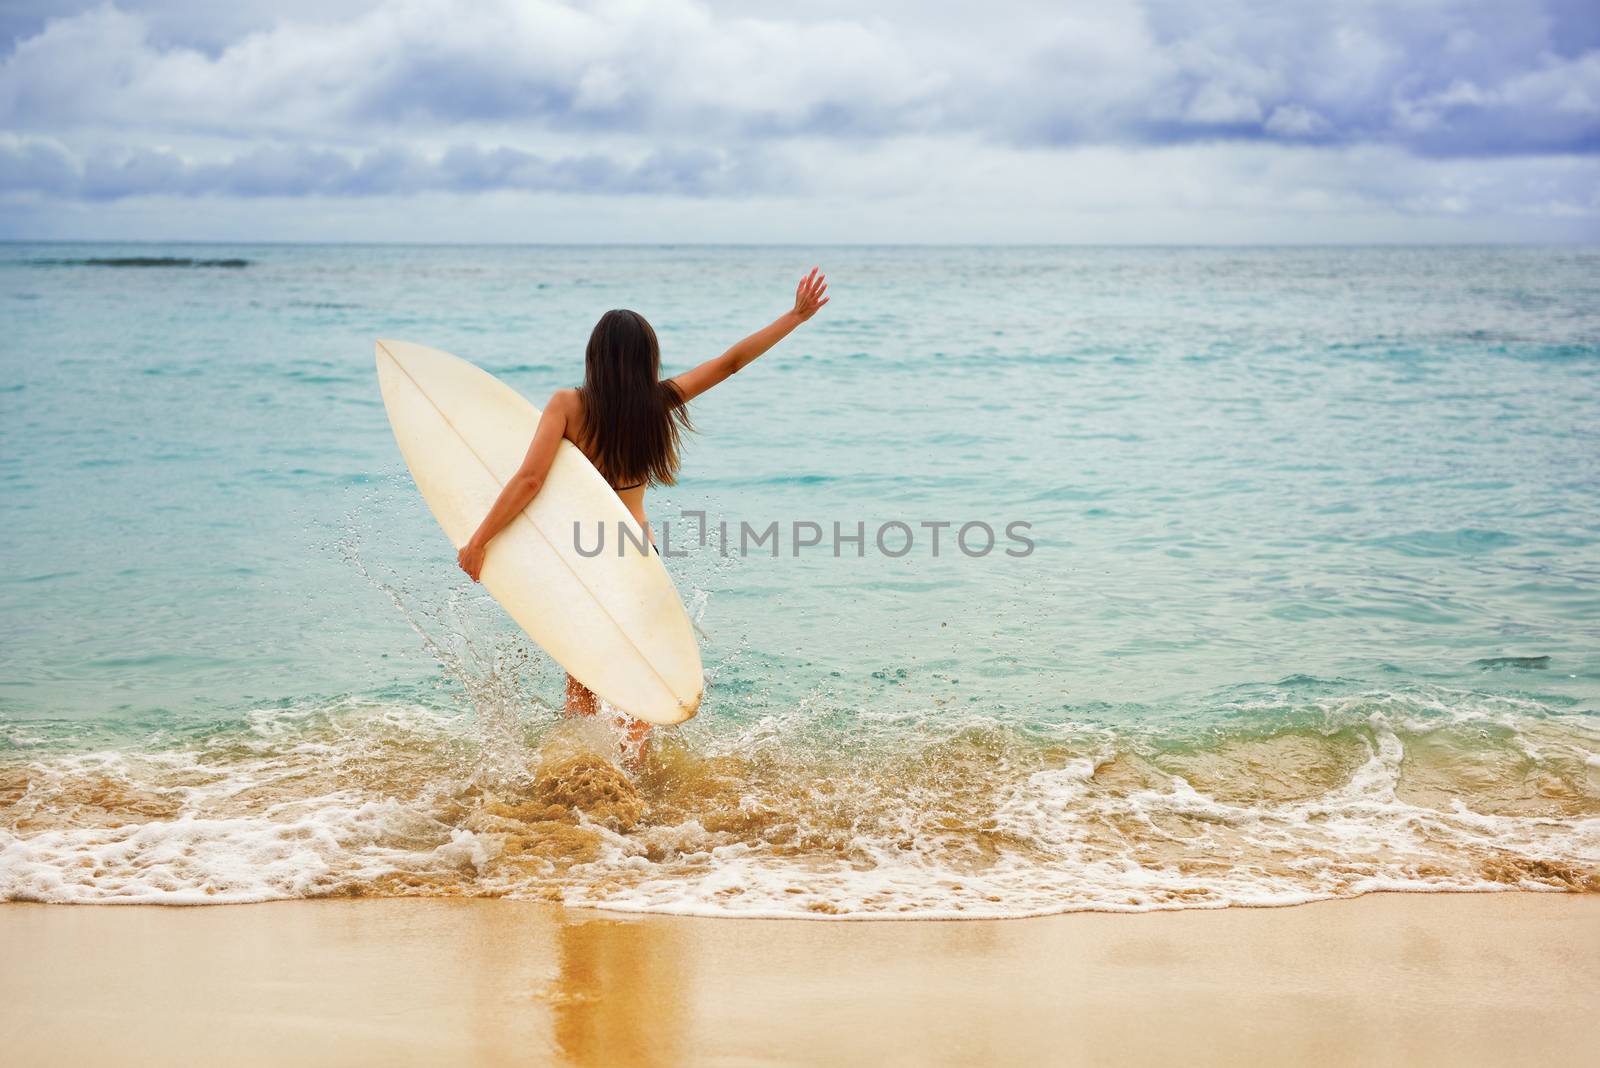 Surfer girl happy cheerful going surfing at ocean beach running into water. Female bikini woman heading for waves with surfboard having fun living healthy active lifestyle by sea.